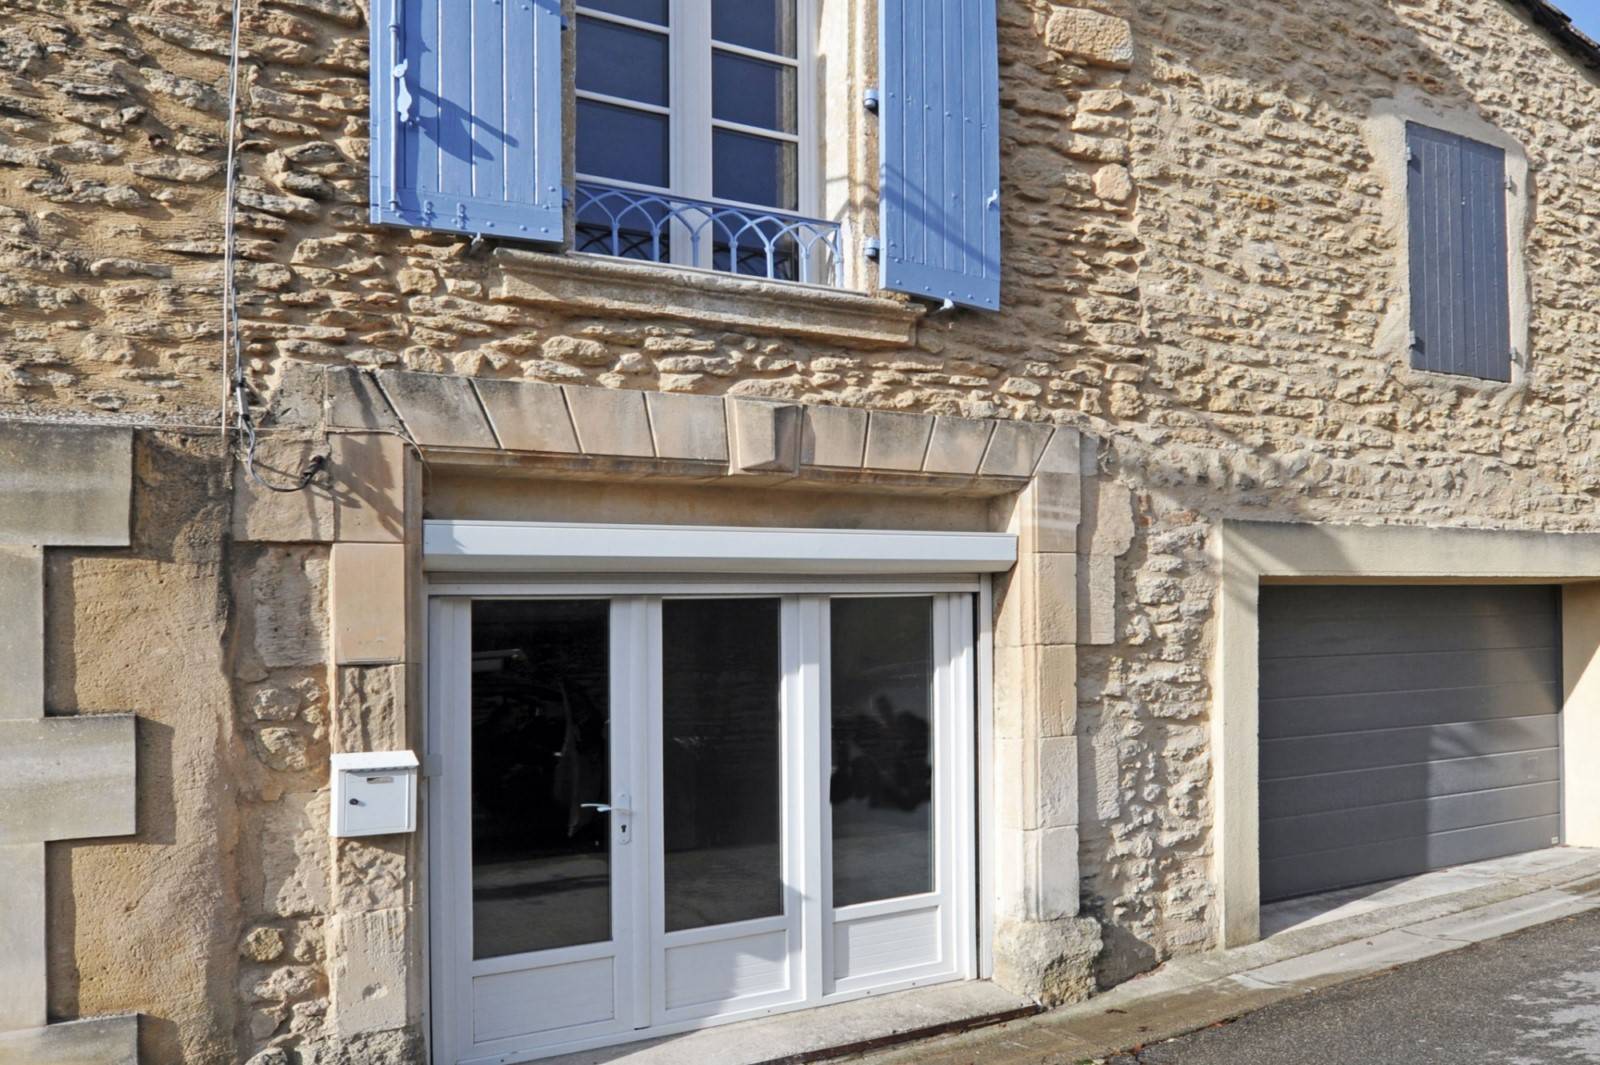 Fully renovated village house in Cabrières-d'Avignon